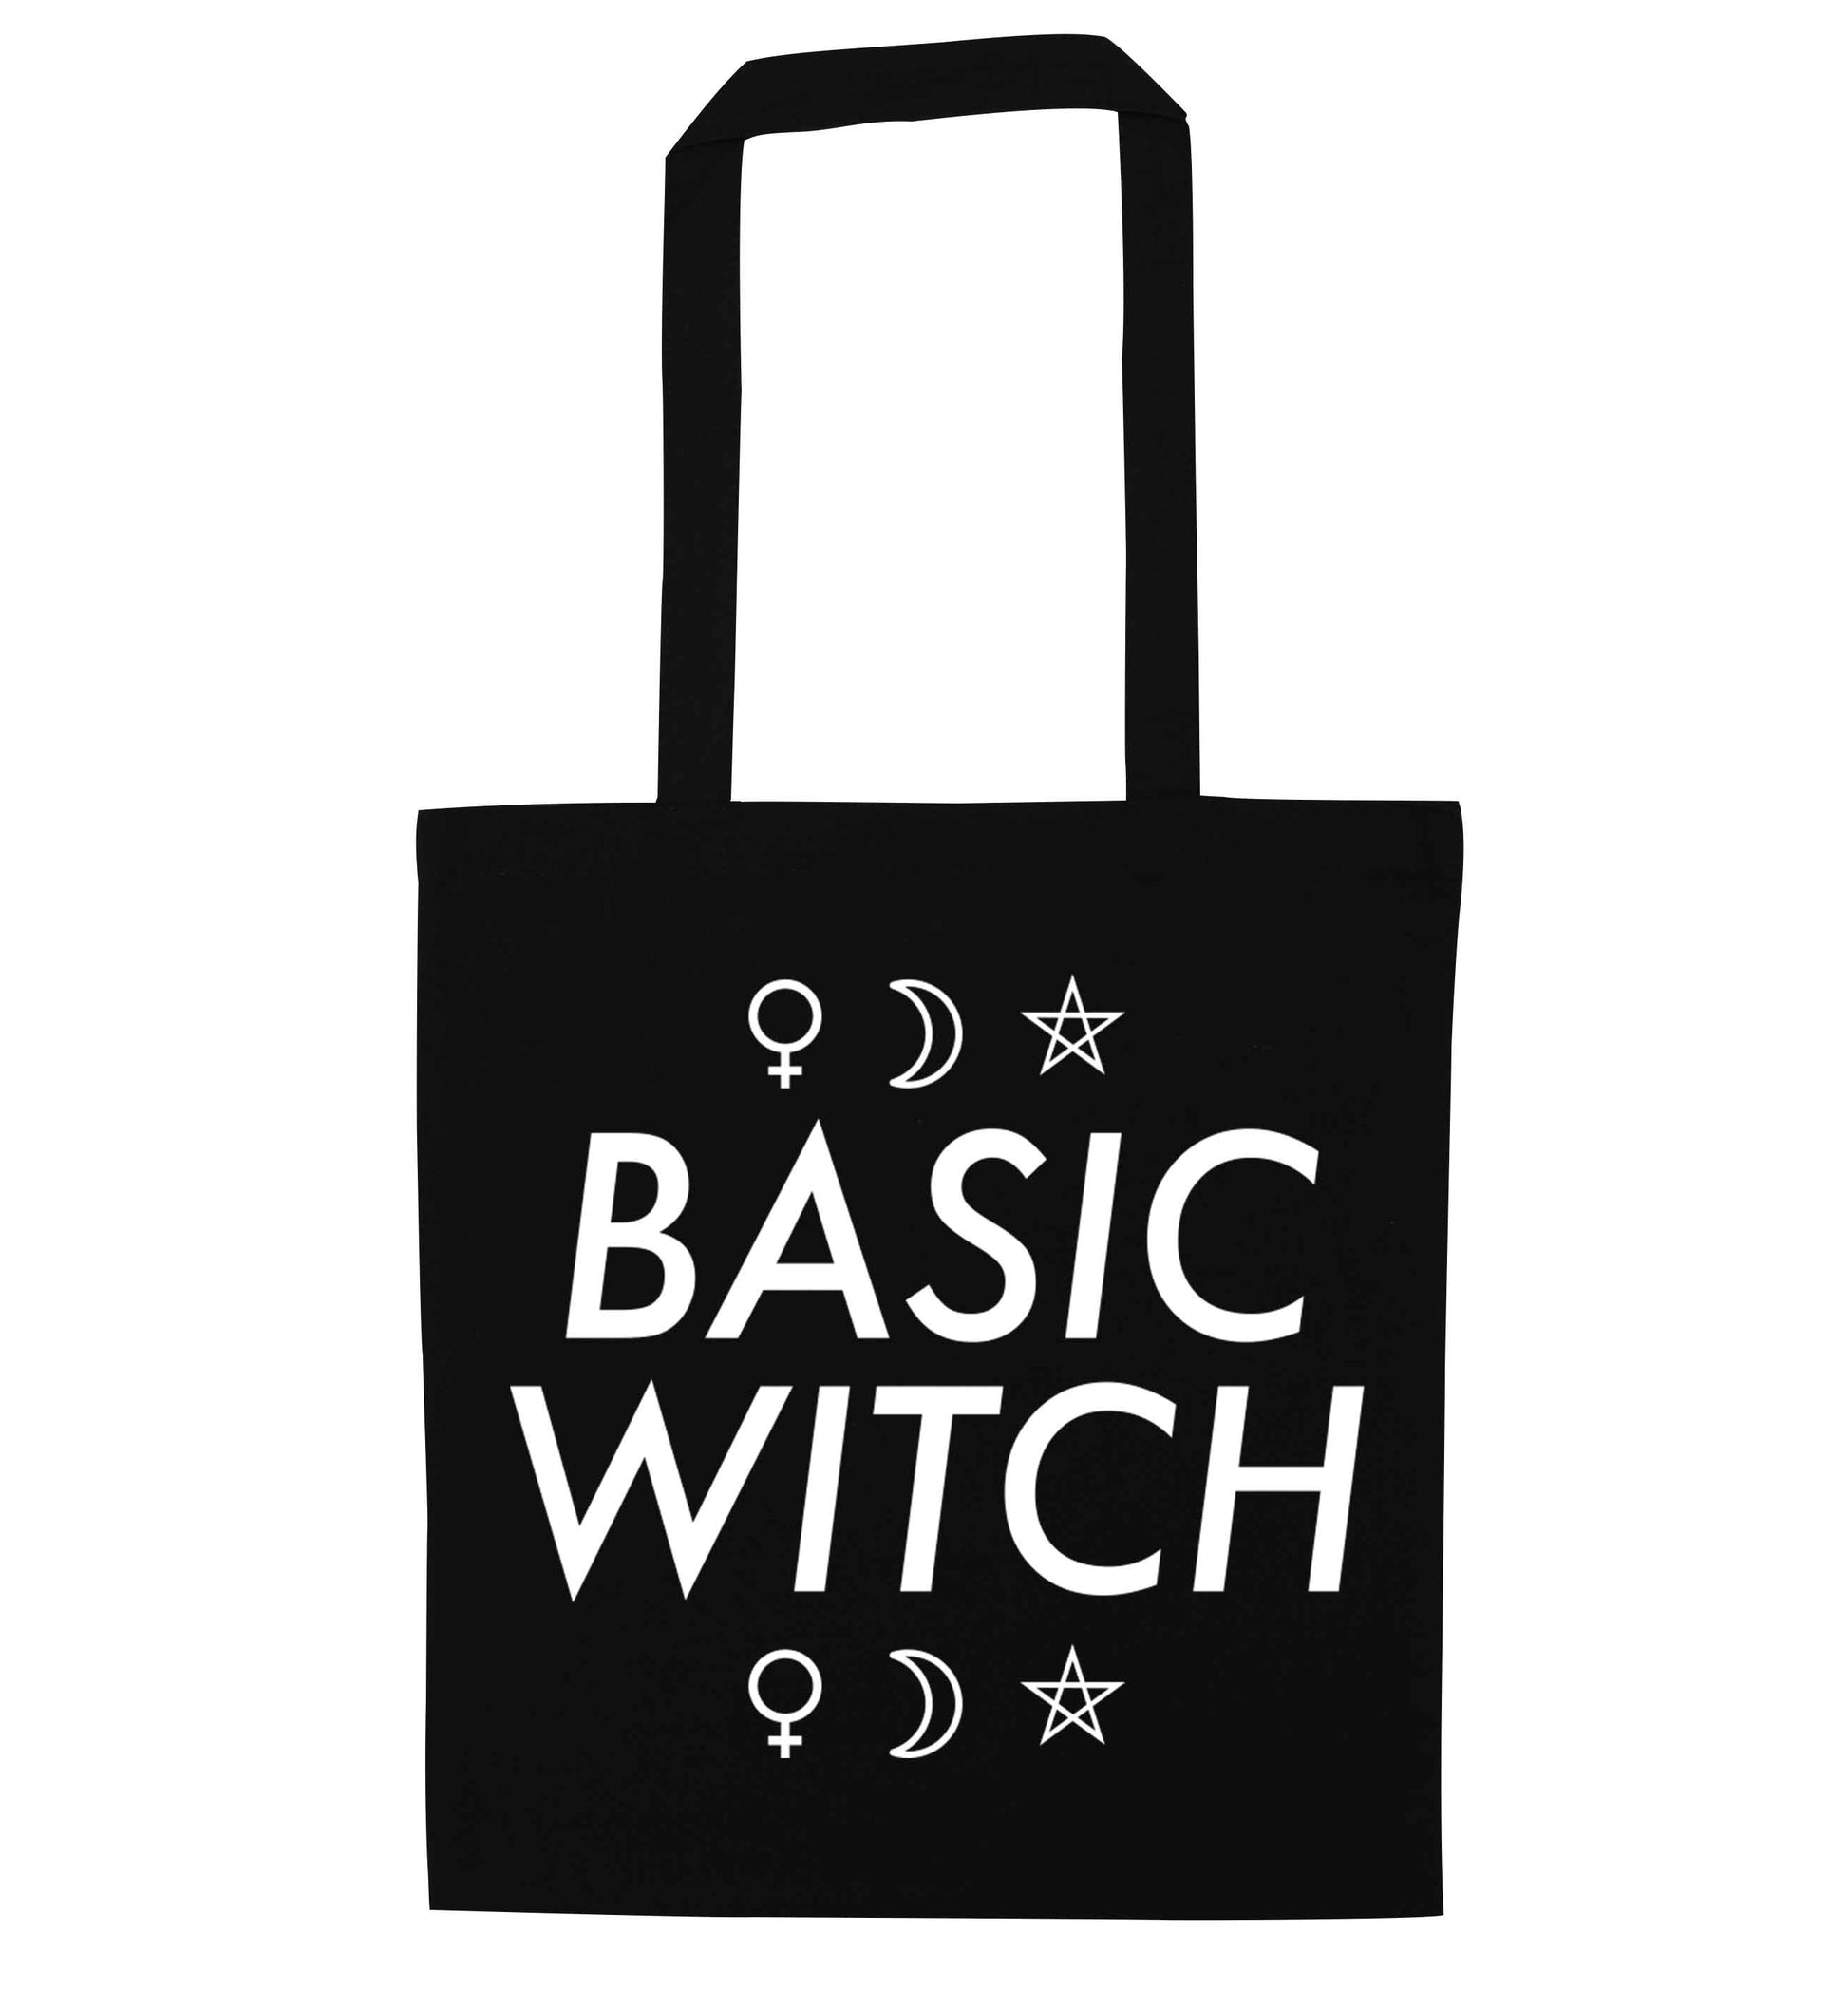 Basic witch 1 black tote bag